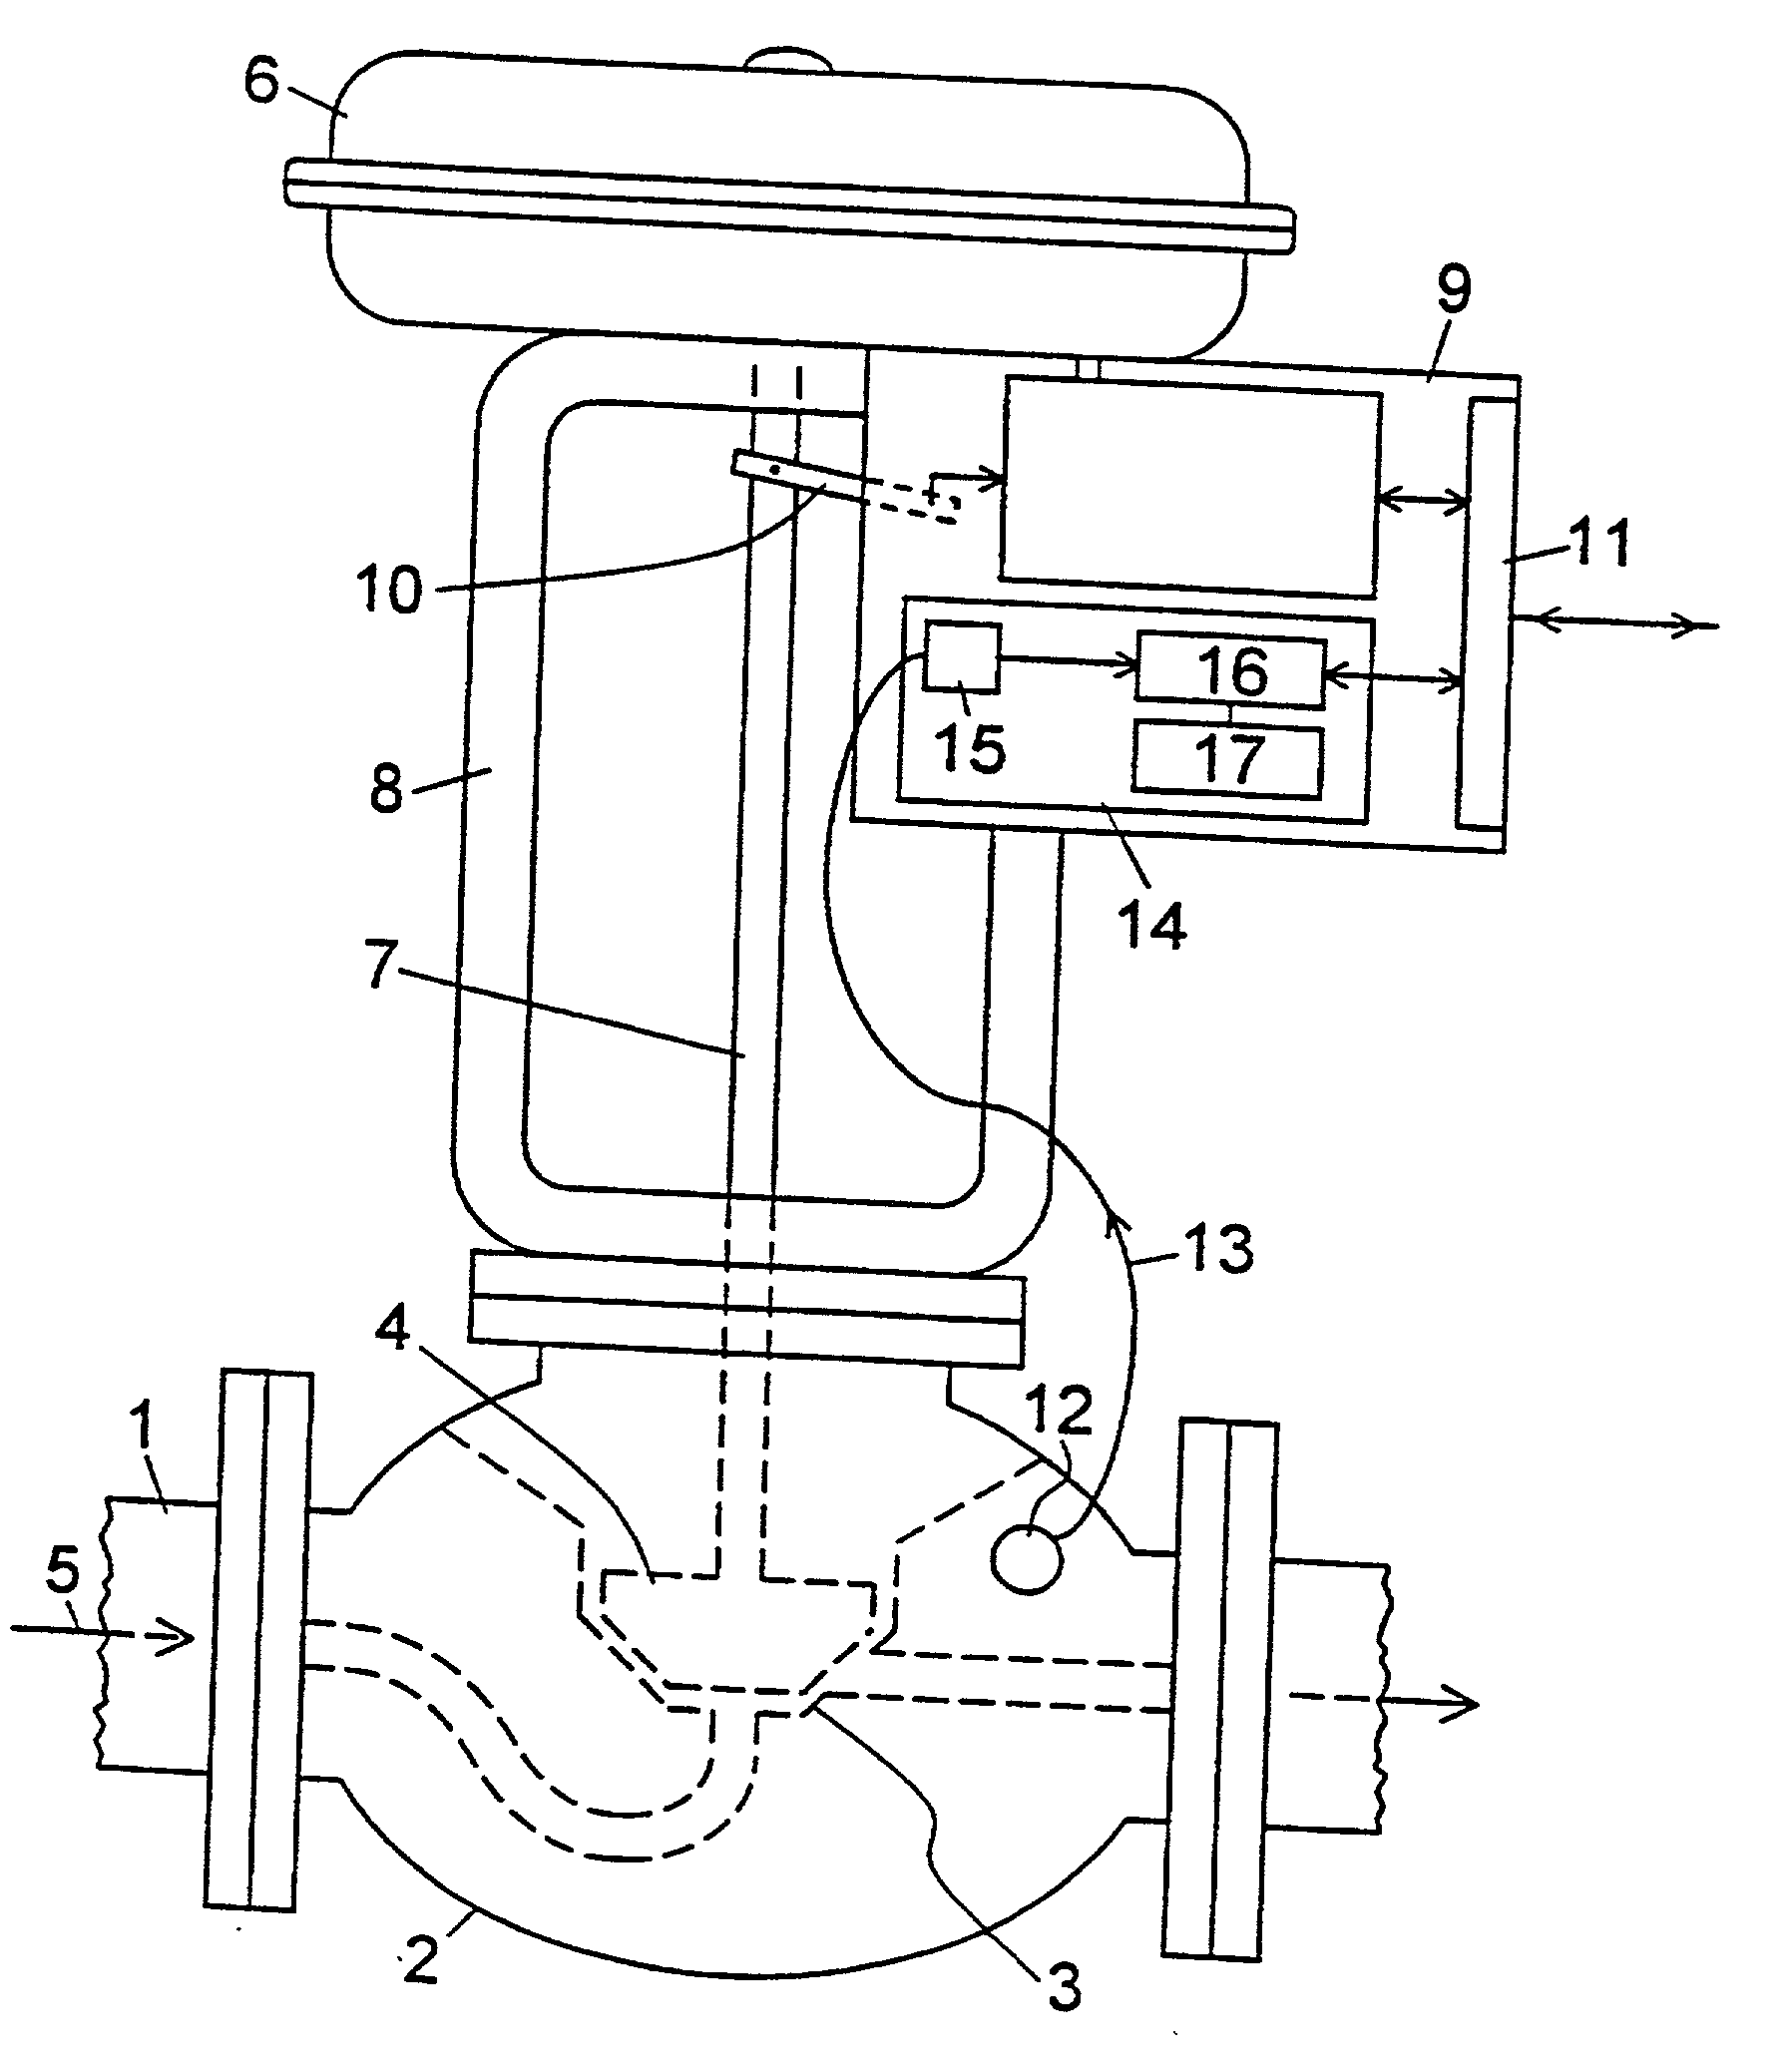 Diagnostic system for a valve that can be actuated by a position controller via a drive